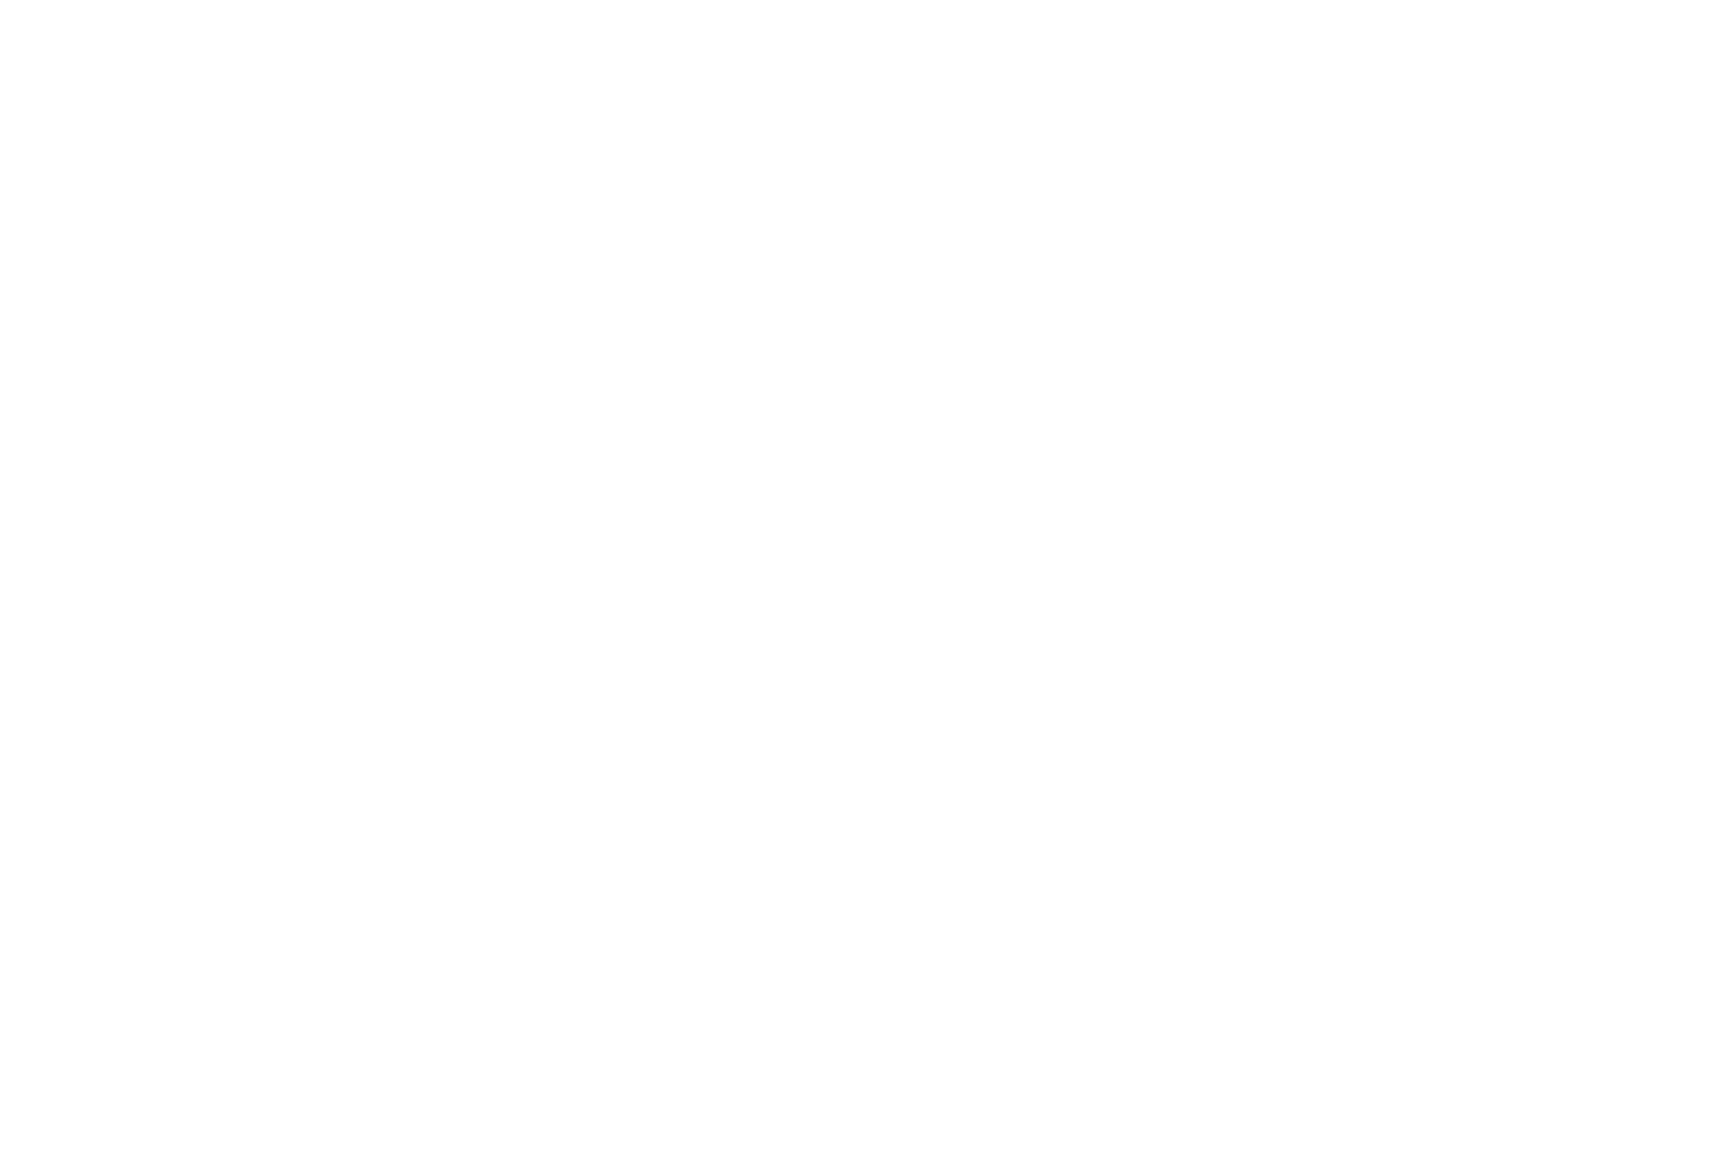 OFFICIAL SELECTION - California International Shorts Festival Winter - 2019.png